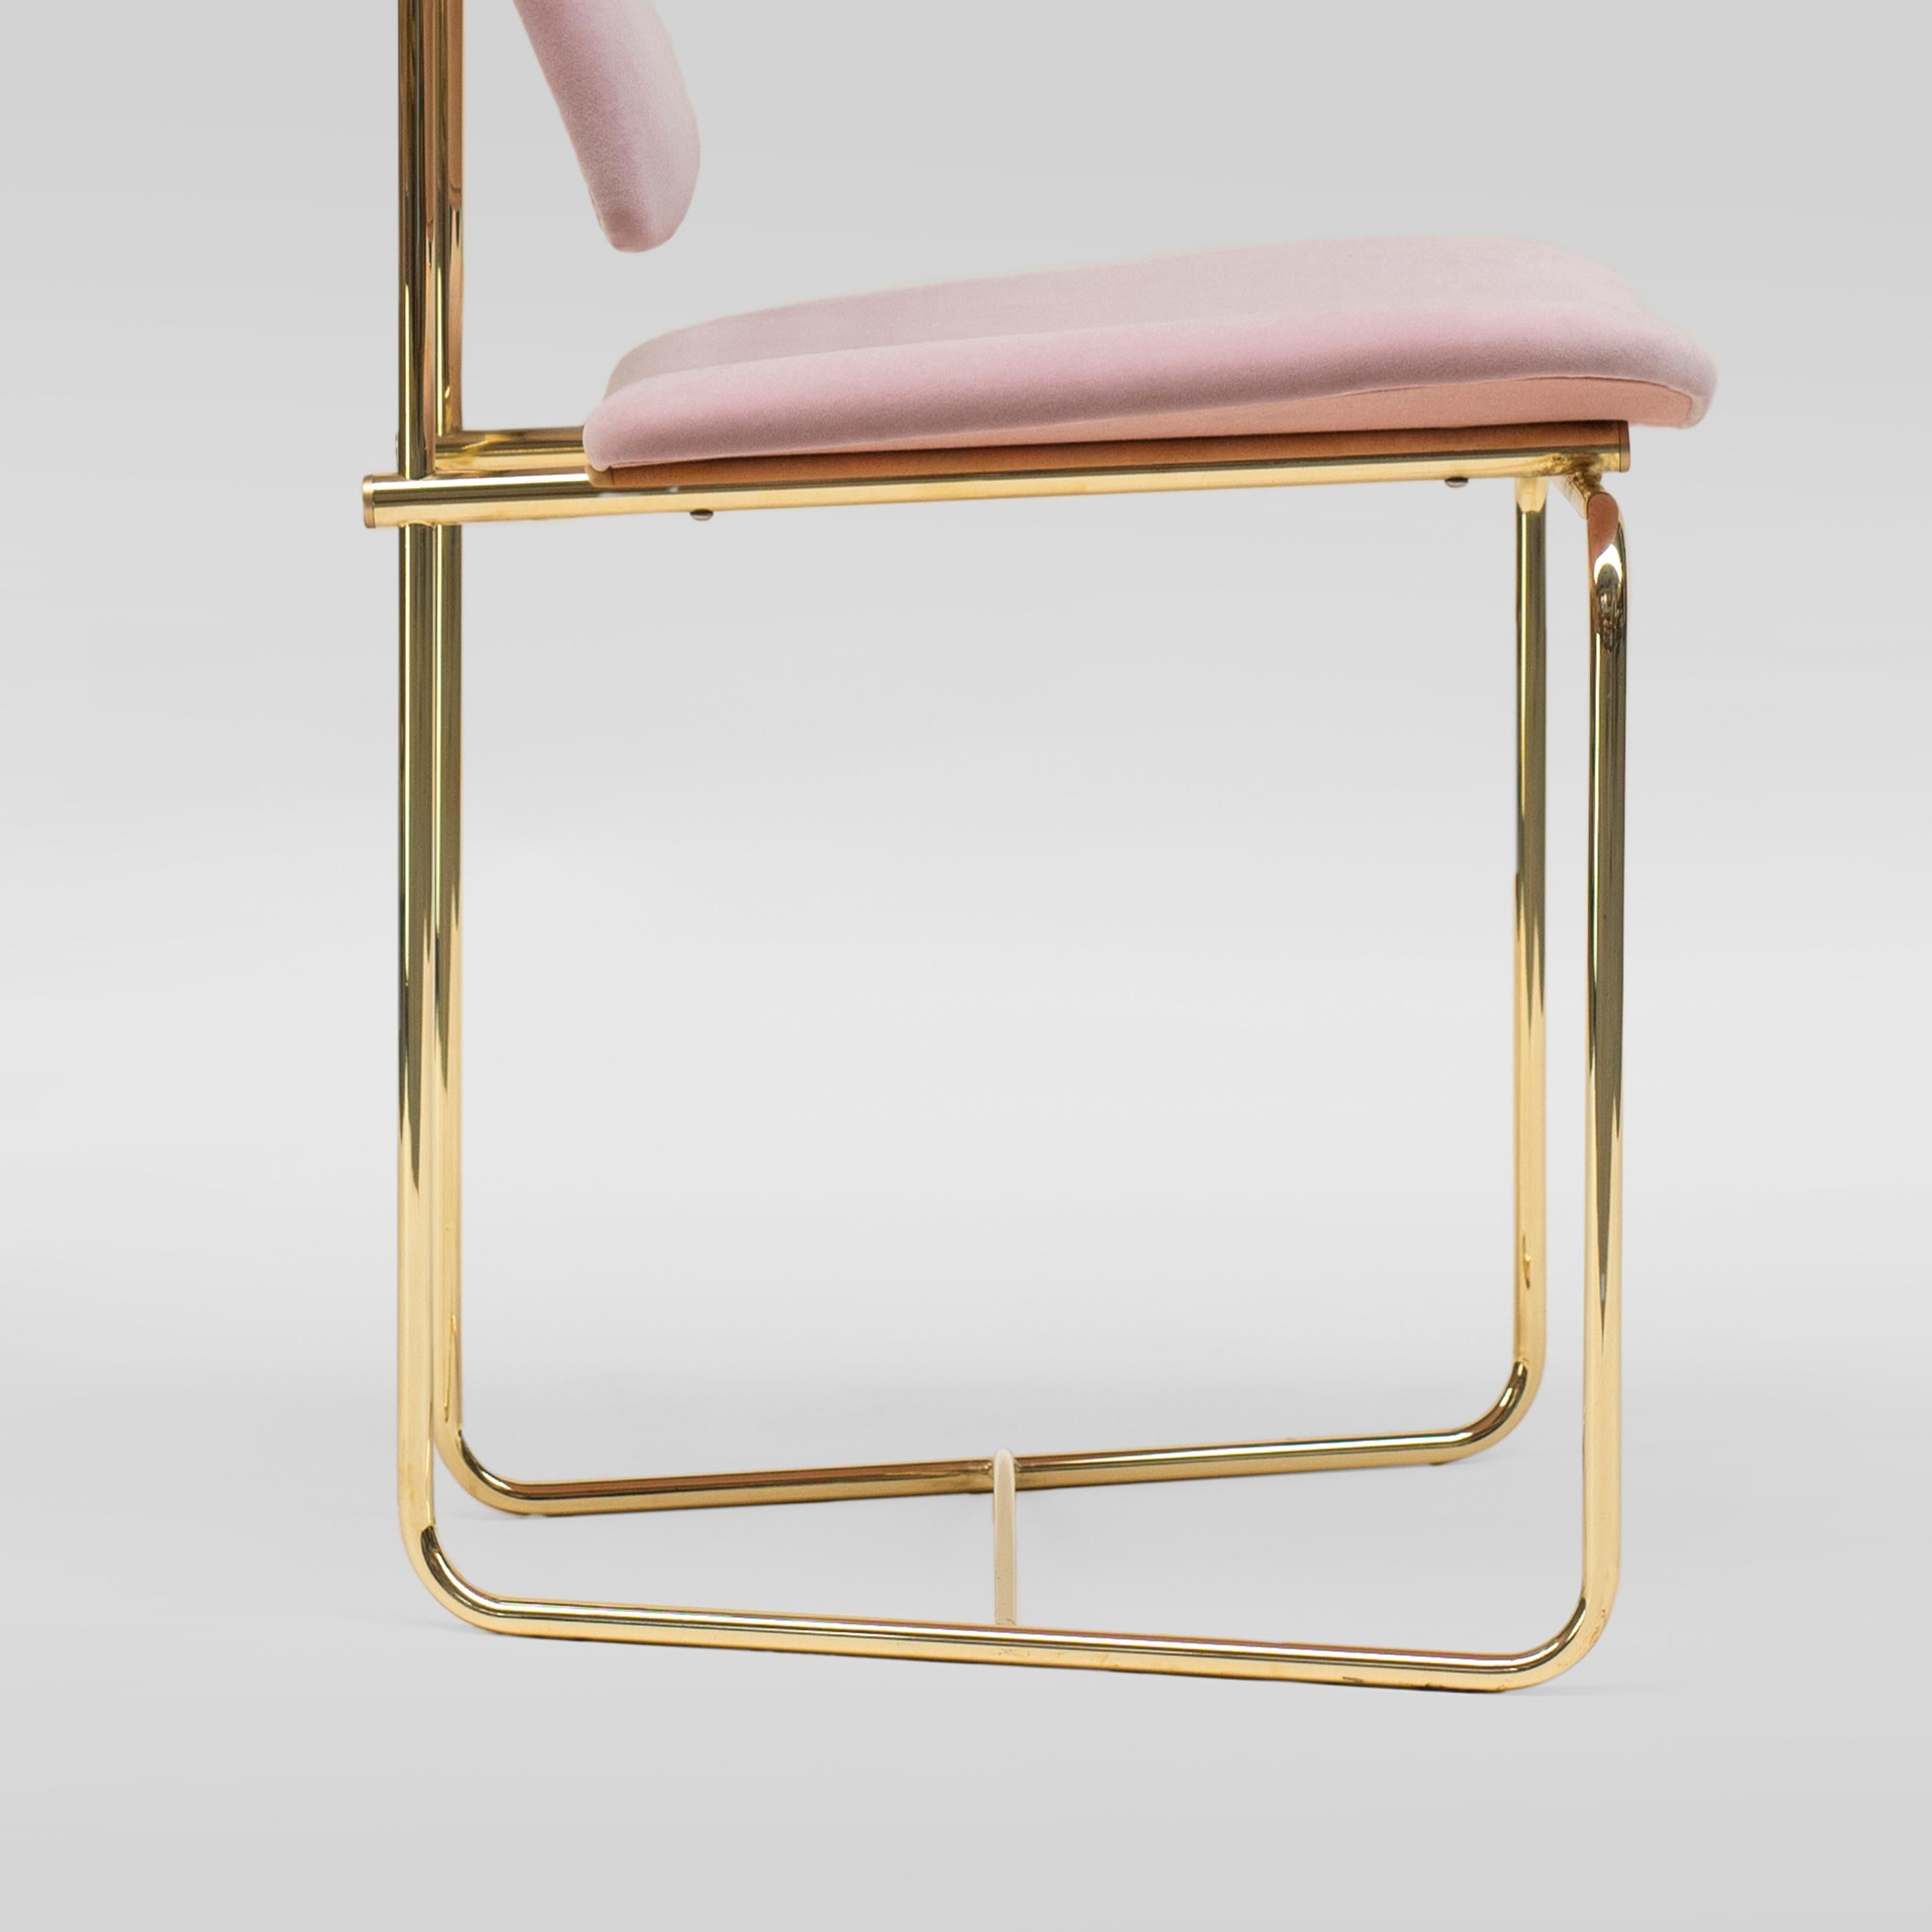 Peter Ghyczy Chair Urban ‘S02’ Brass Gloss / Pink Fabric 1